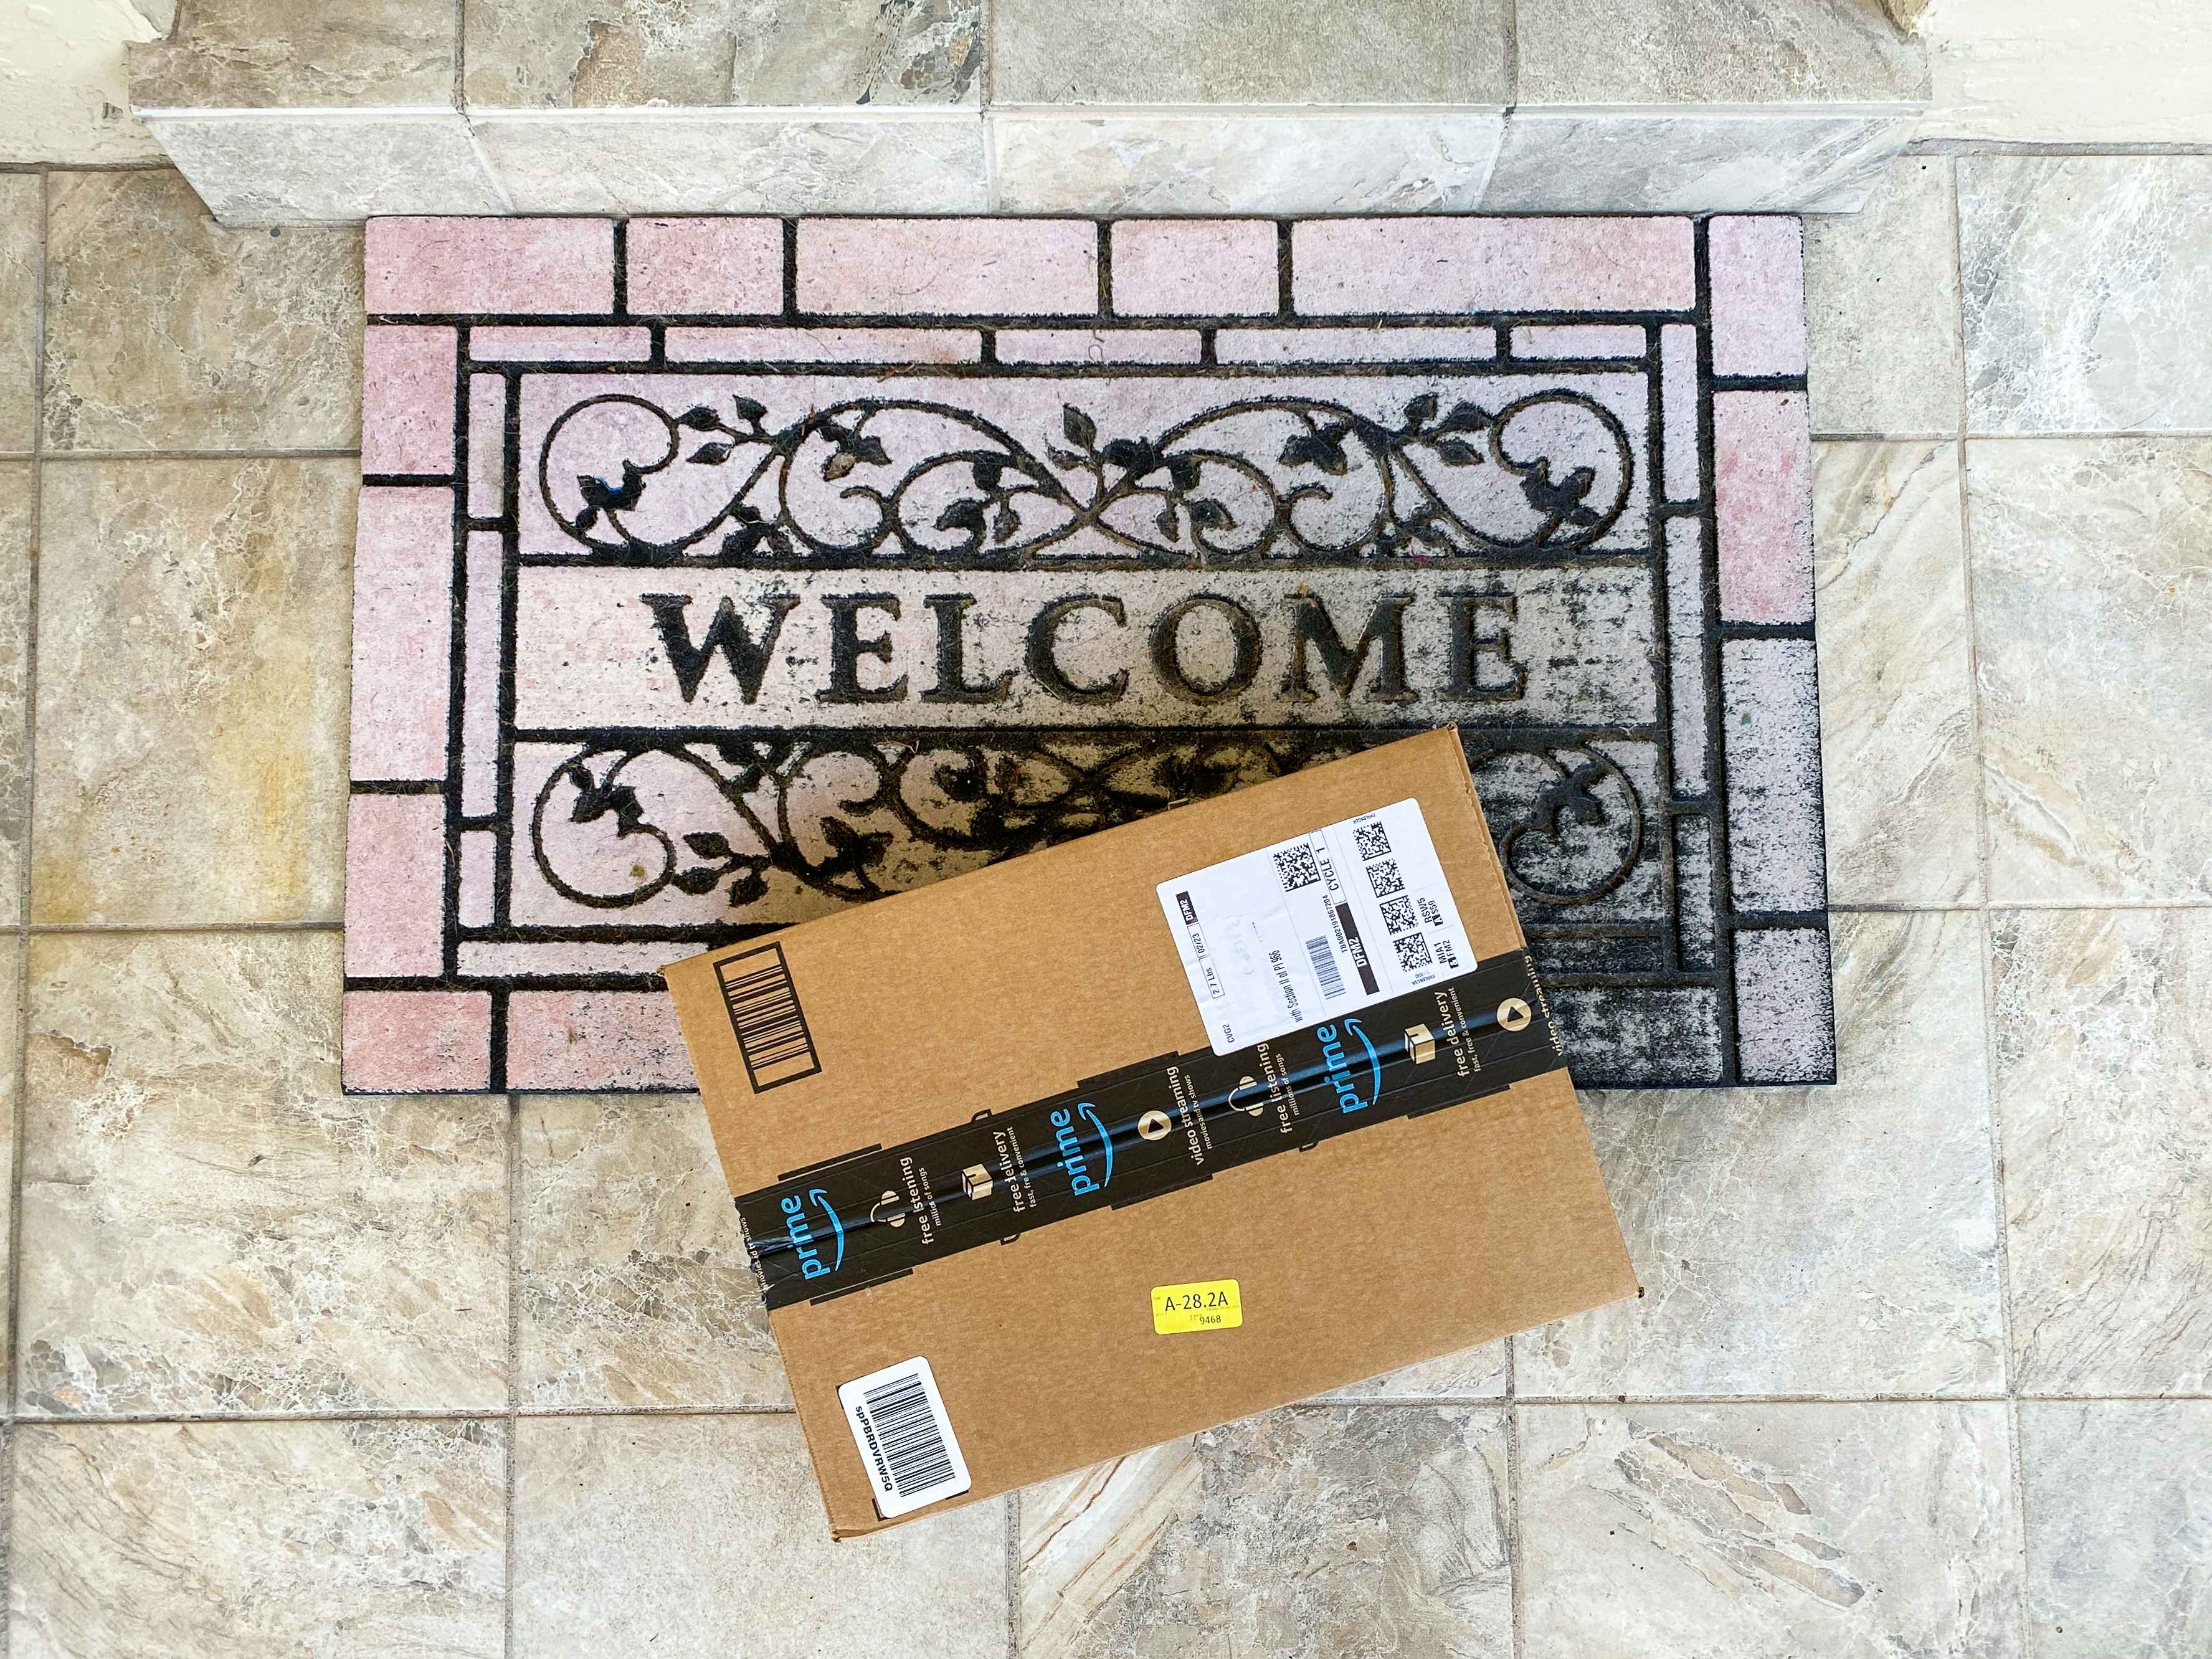 An Amazon box sitting on a welcome mat outside a front door.